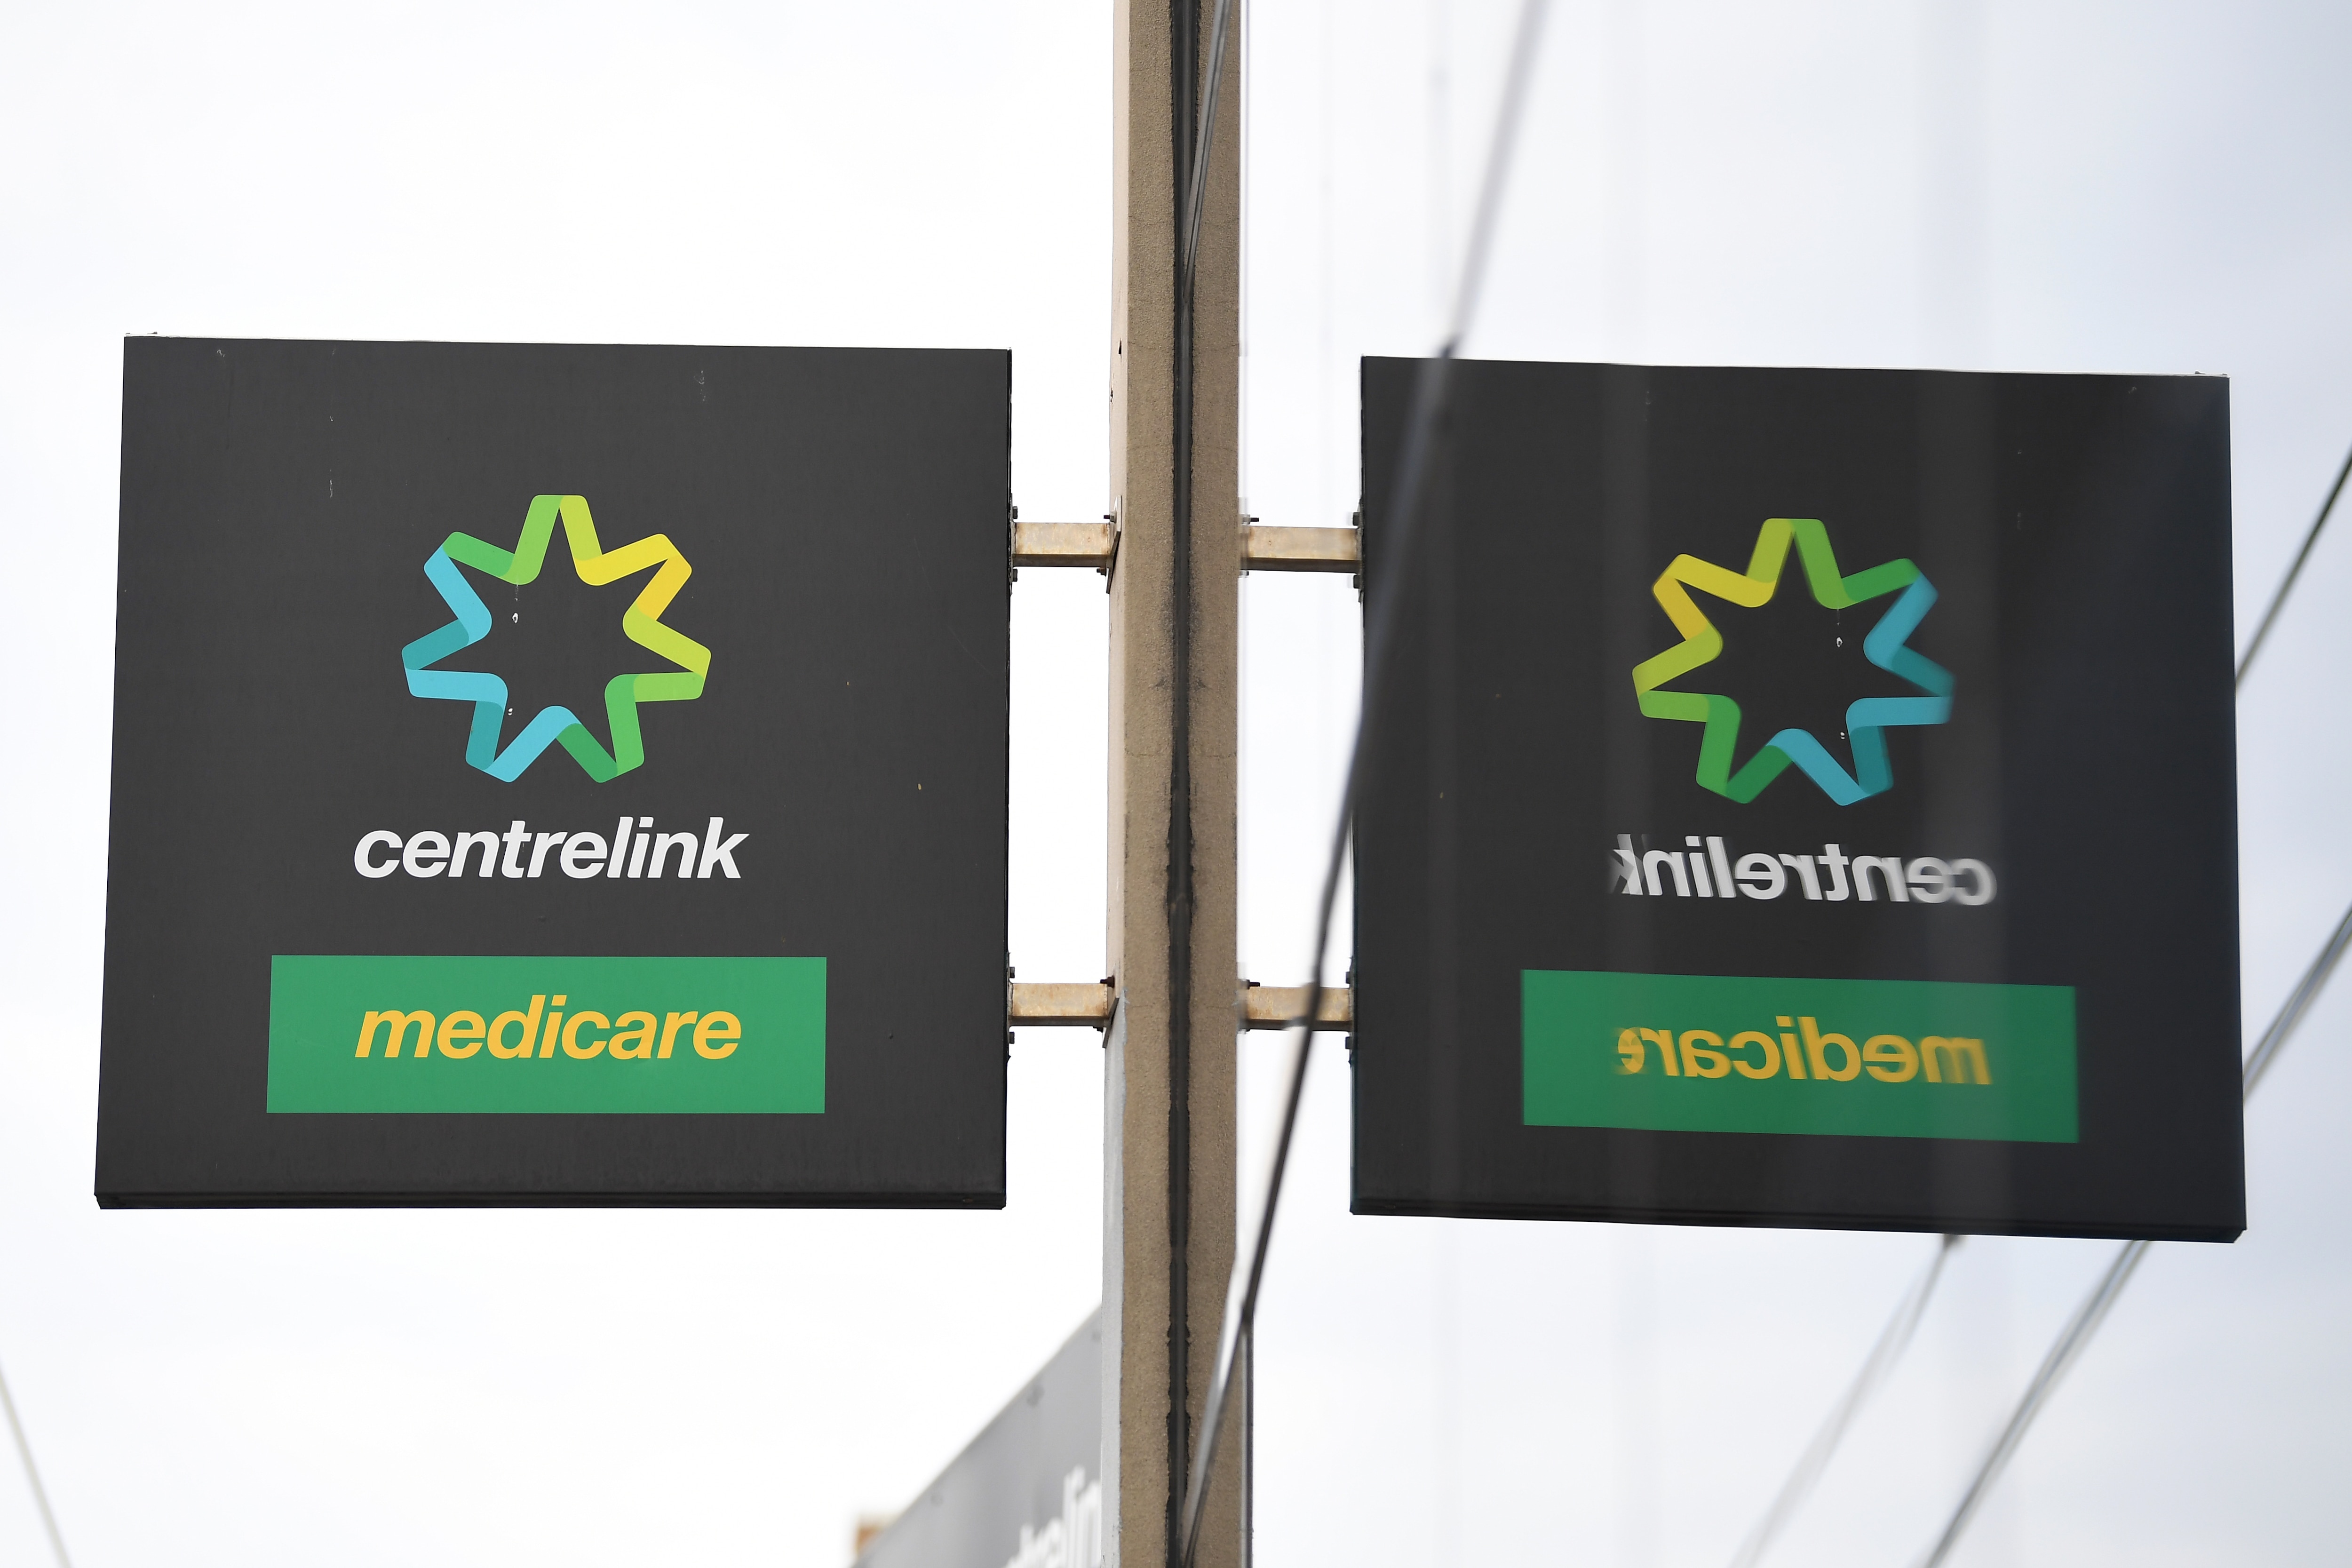 Generic image of Centrelink signage at the Prahran office in Melbourne.